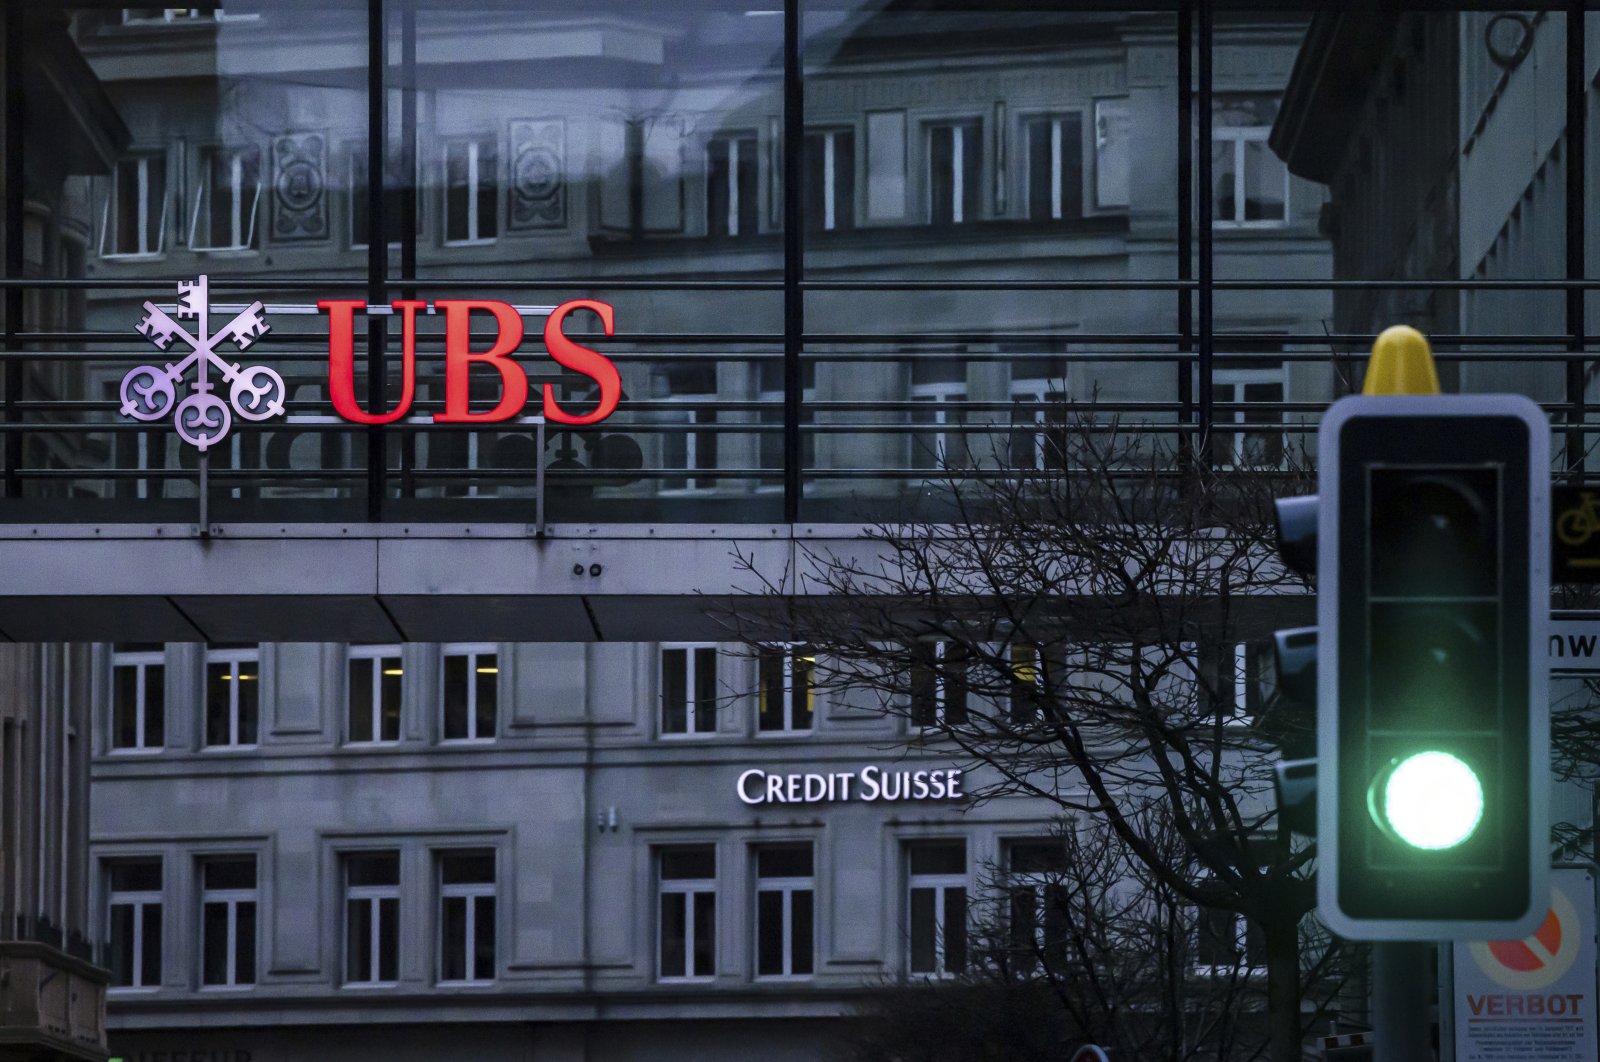 UBS finalizes Credit Suisse takeover to become wealth management behemoth